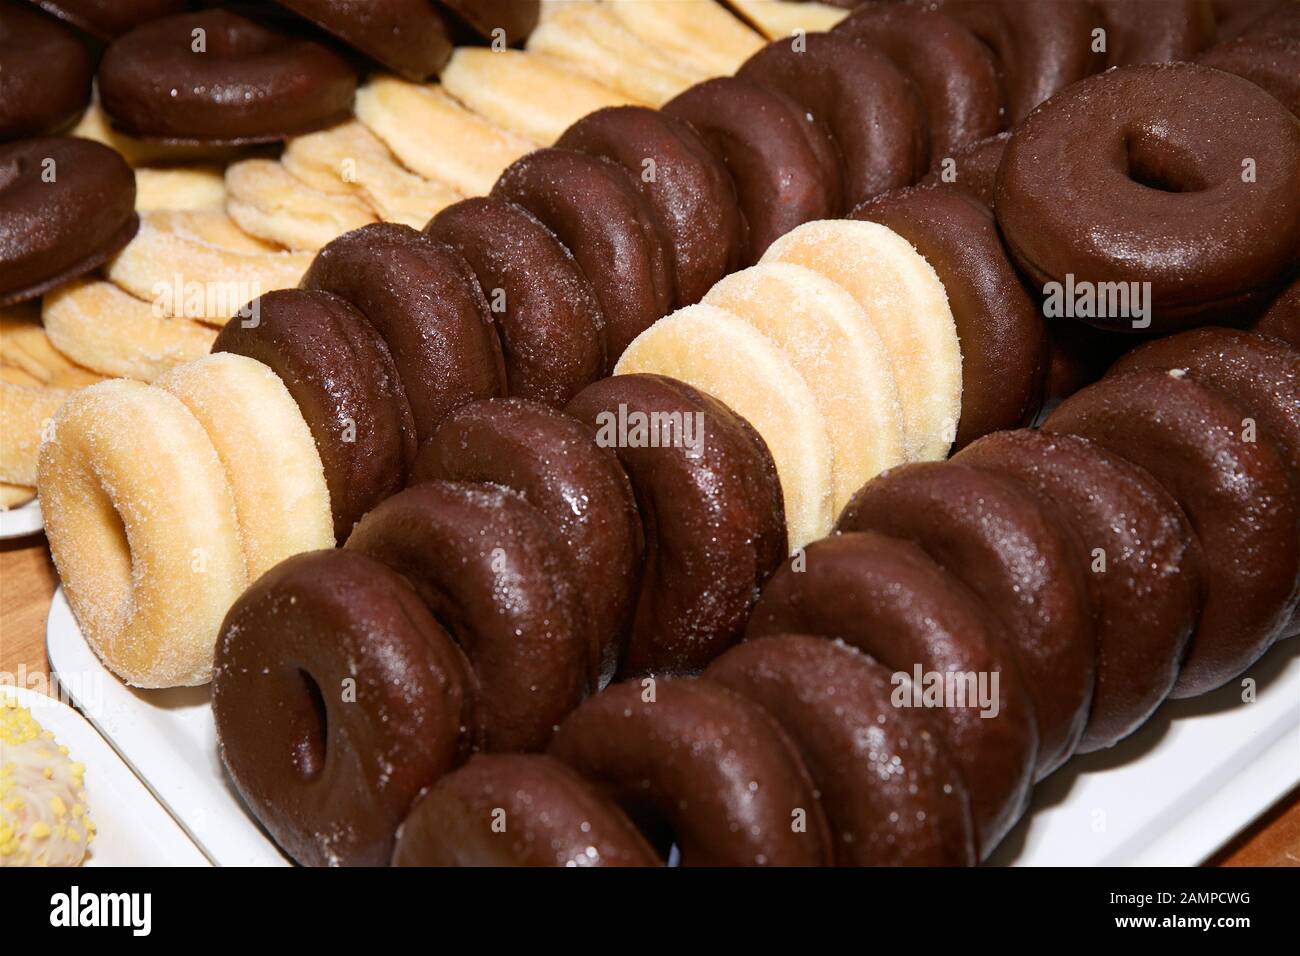 Collection of donuts in rows. Stock Photo